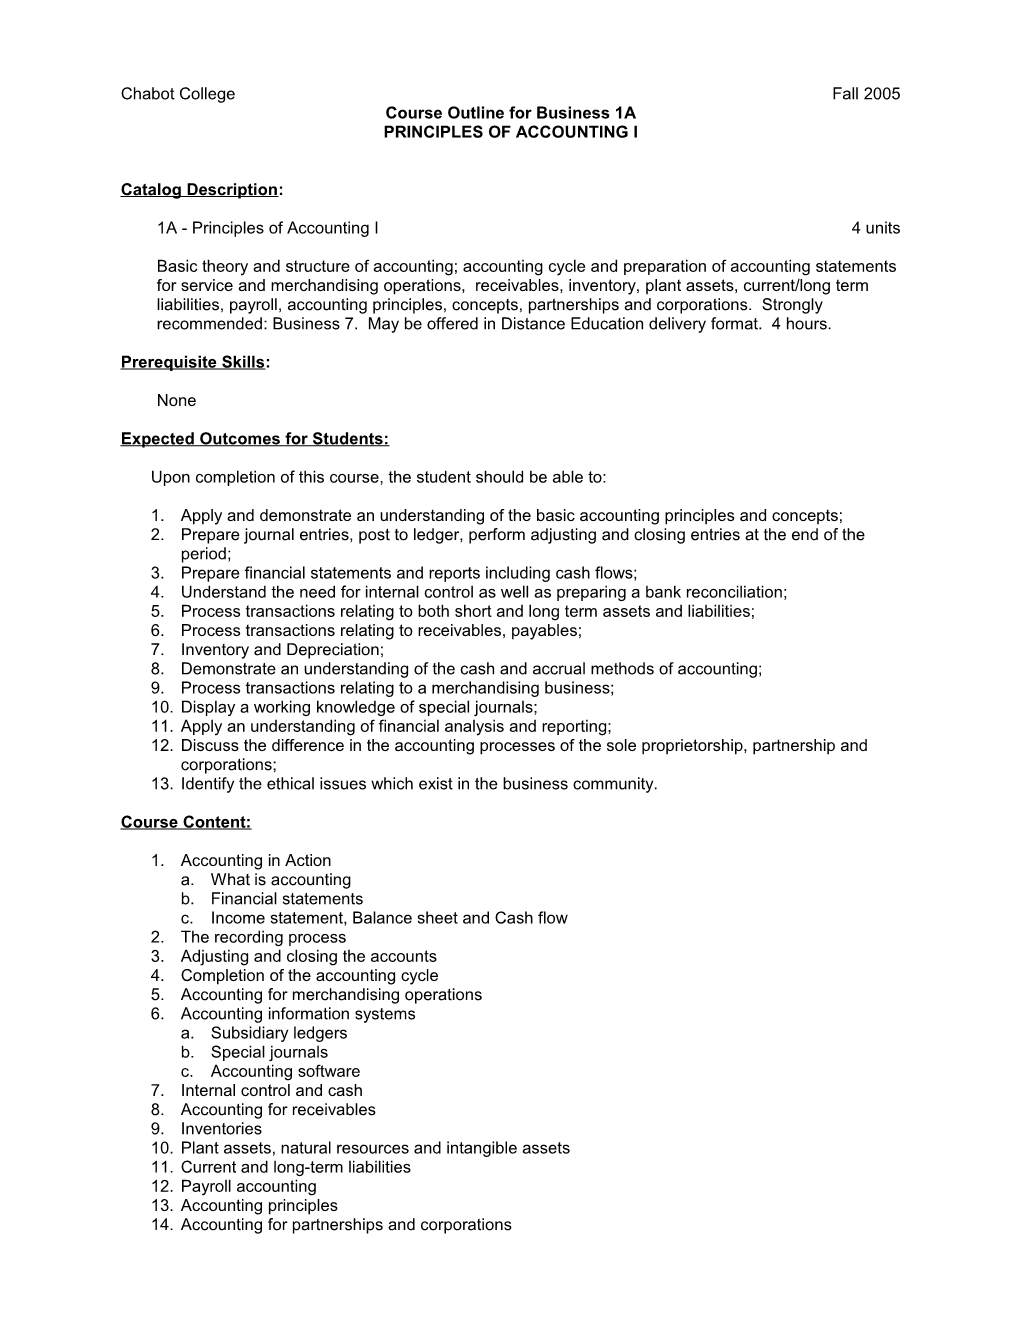 Course Outline for Business 1A,Page 1